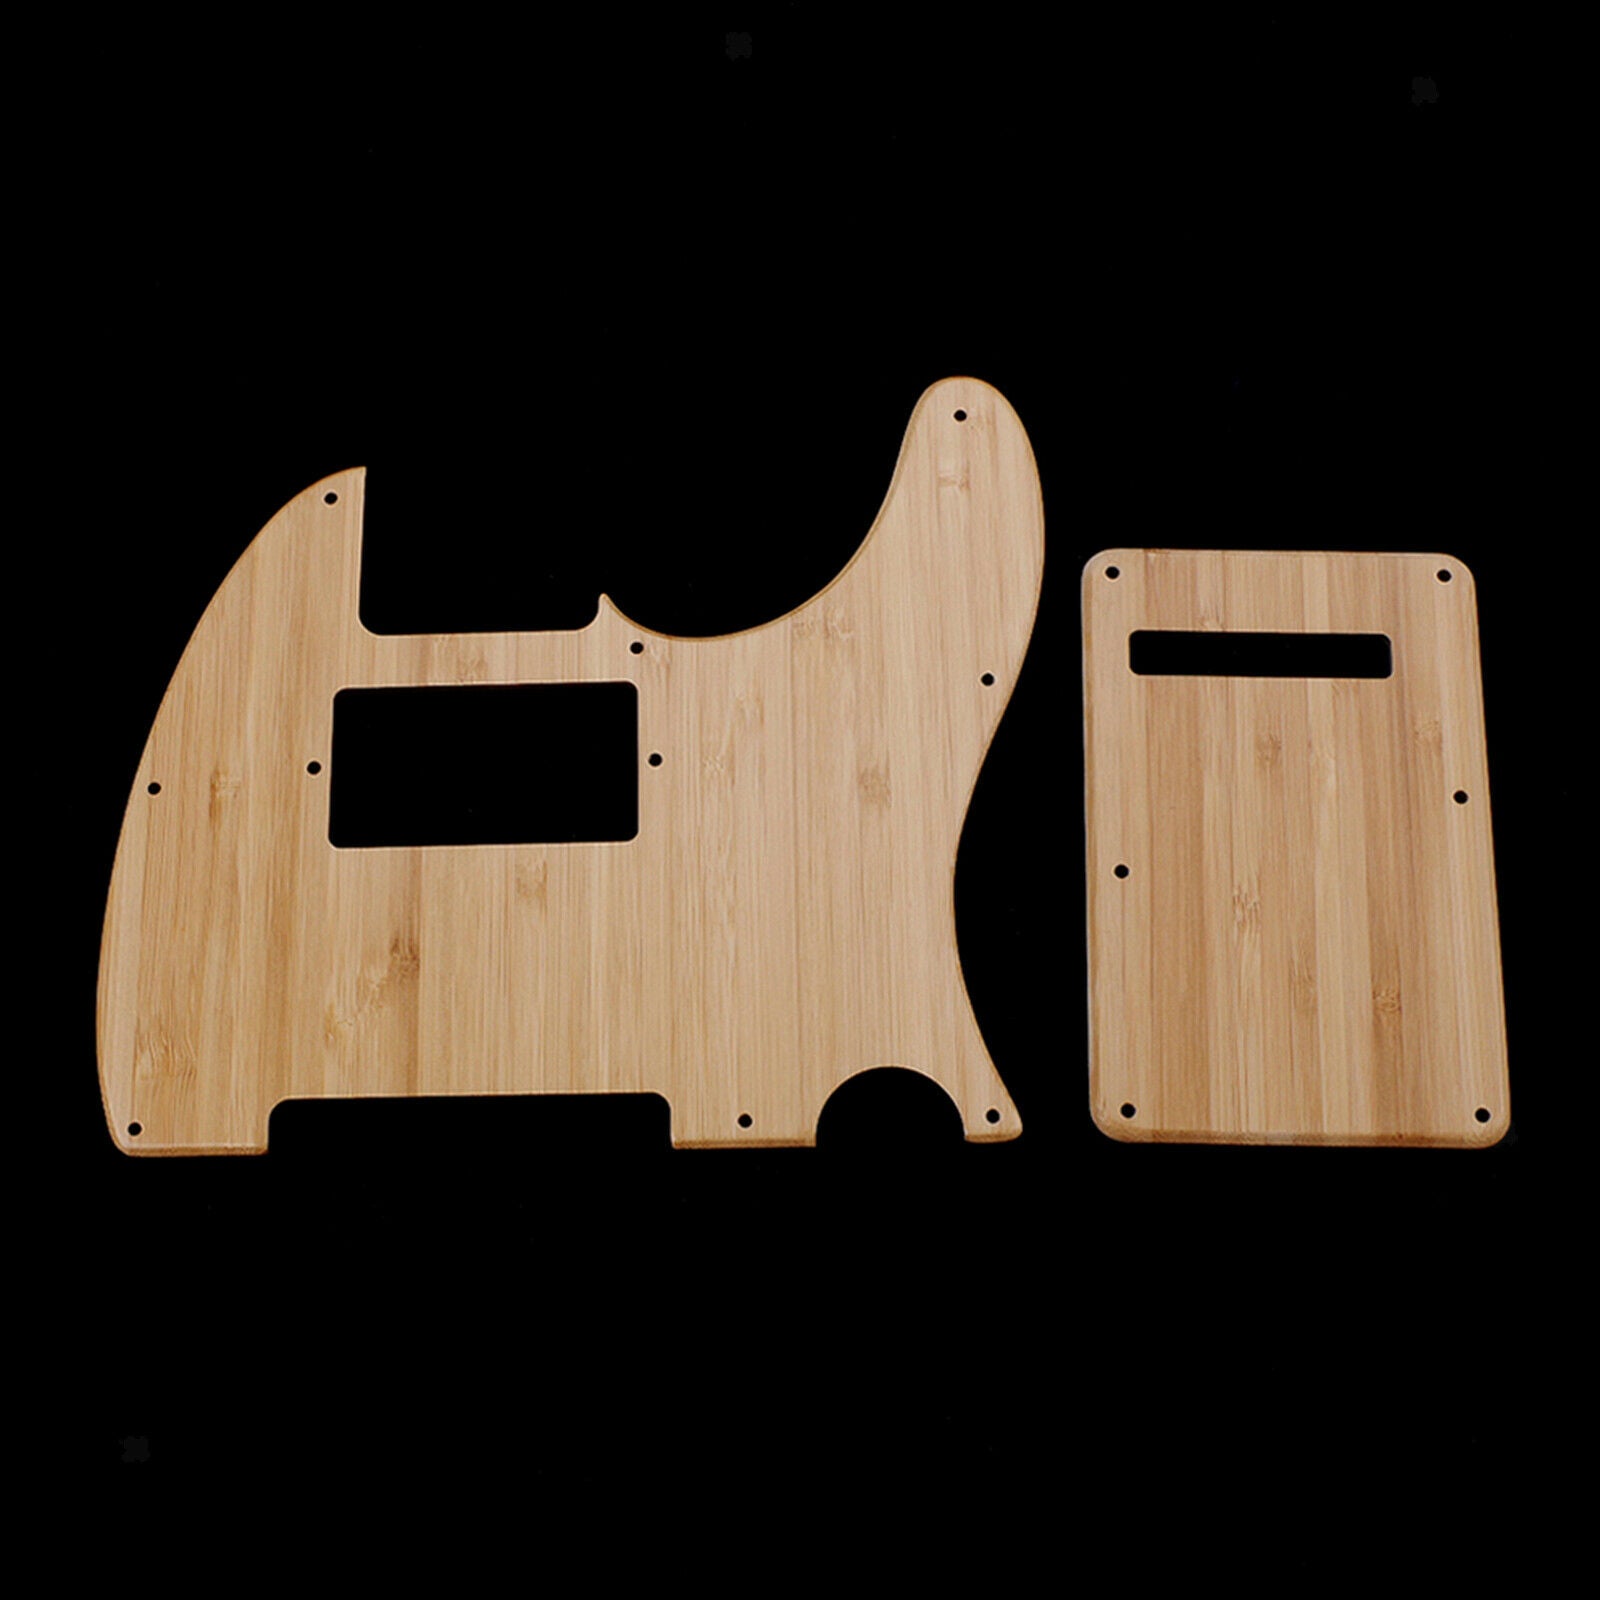 1ply Bamboo Pickguard Scratch Plate Back Plate Set for Electric Guitar